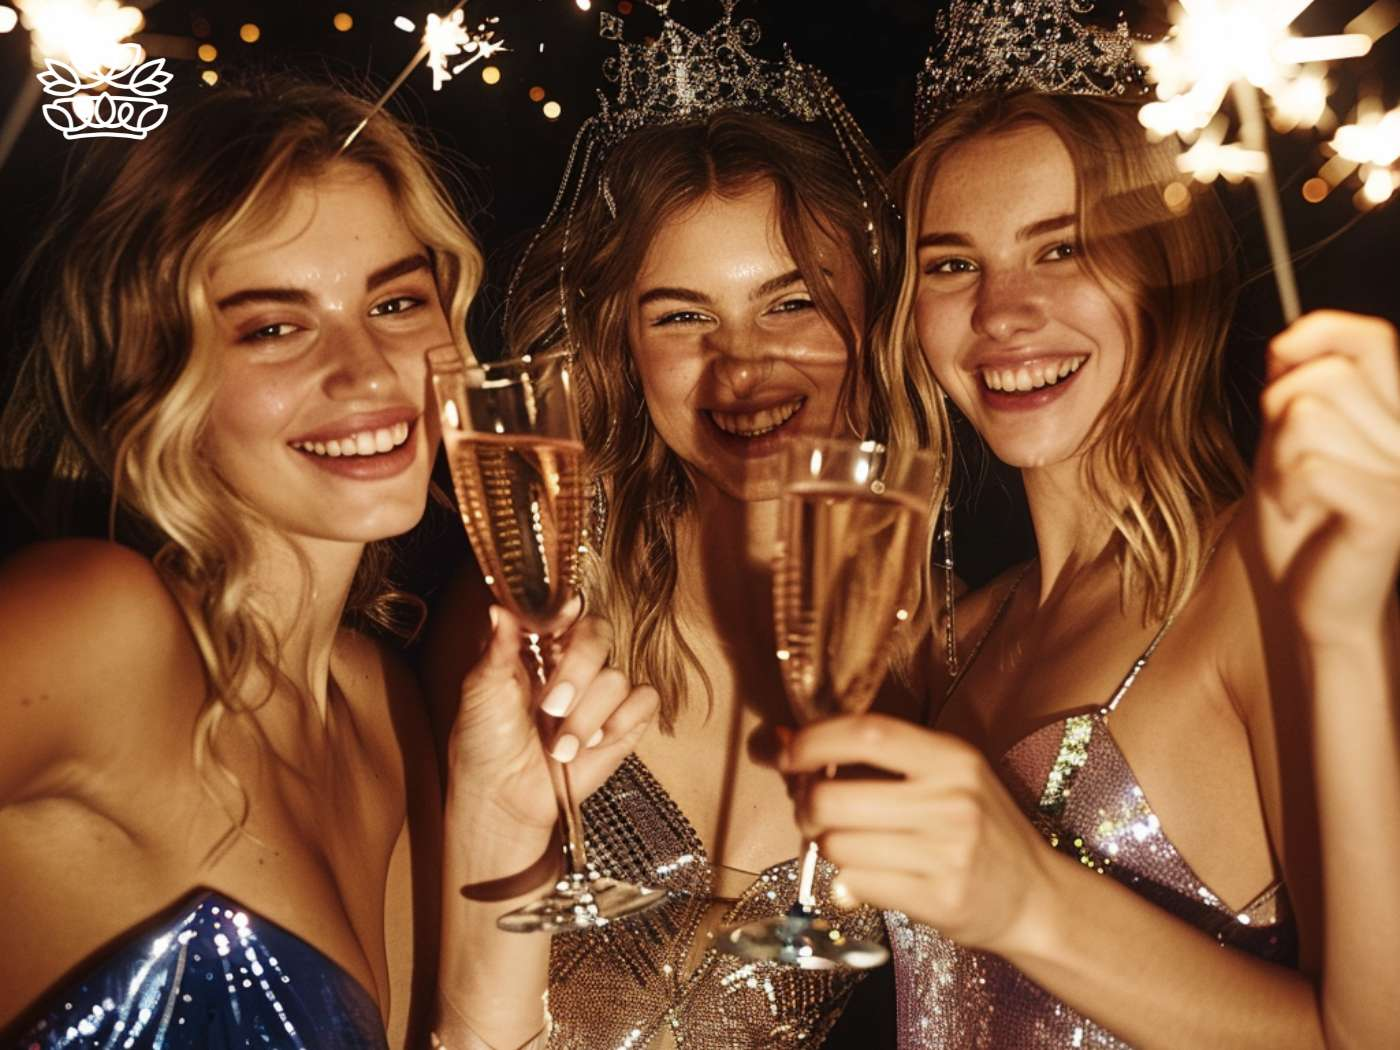 Three jubilant friends toasting with champagne, adorned in sparkling attire and tiaras, radiating joy, embodying the celebratory spirit of Fabulous Flowers and Gifts.